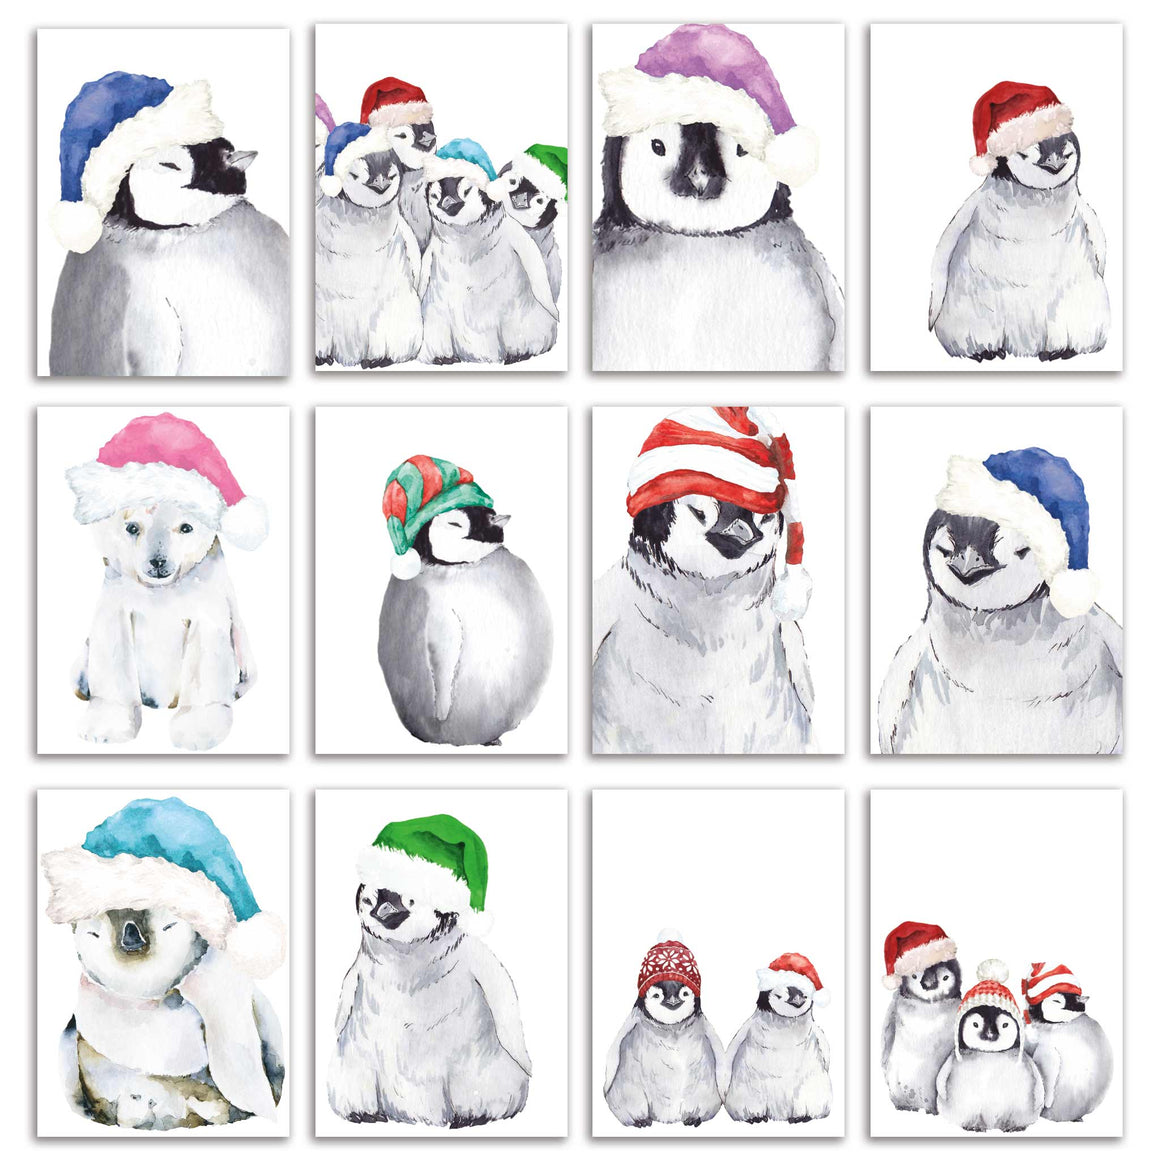 24 Adorable Baby Animal Holiday Greeting Cards + Envelopes | Christmas Penguins